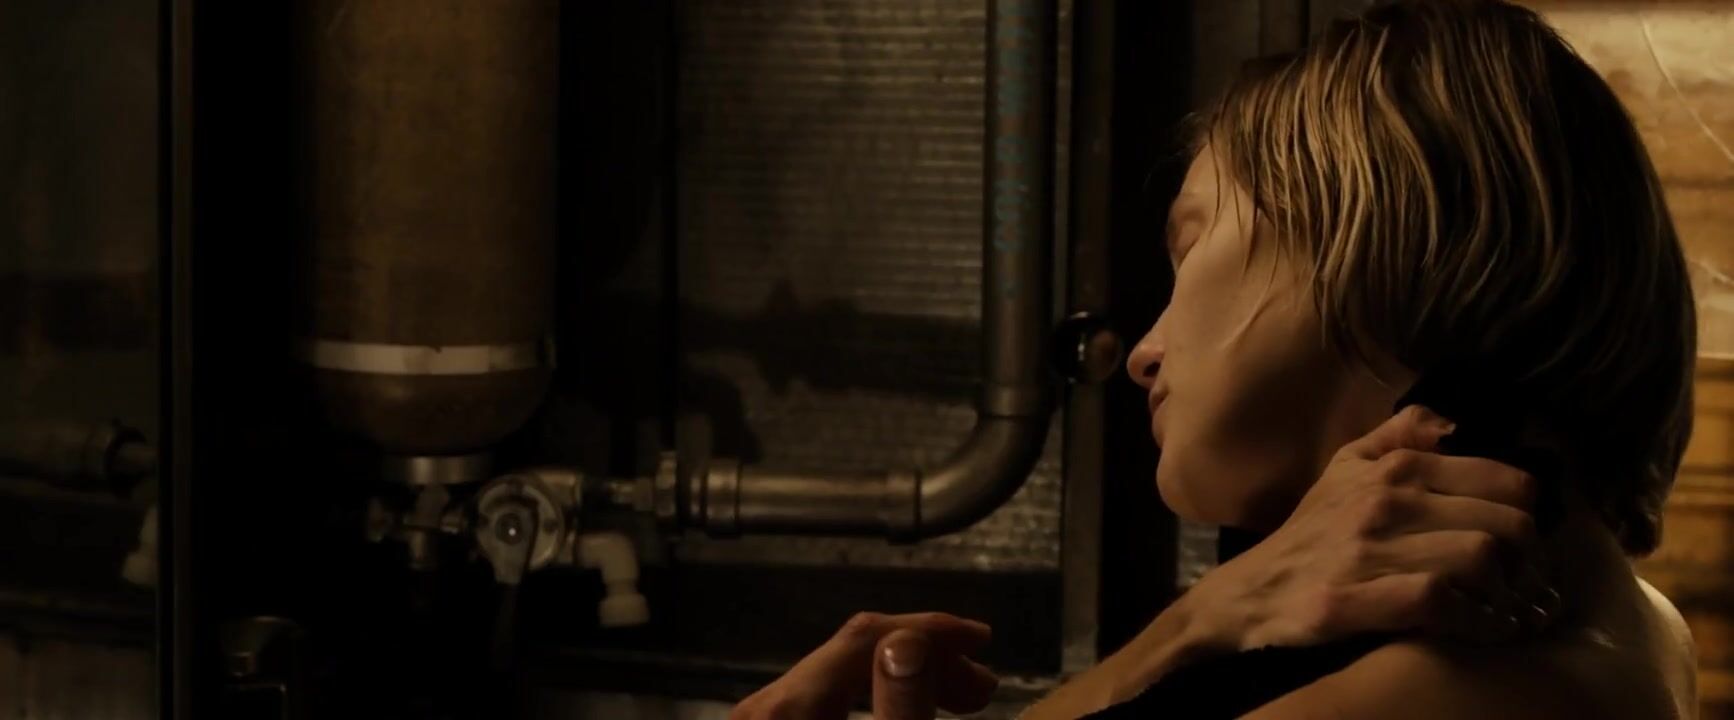 Hot Blow Jobs Riddick tells story of Katee Sackhoff who takes clothes off and goes washing body (2013) Best Blow Job - 1